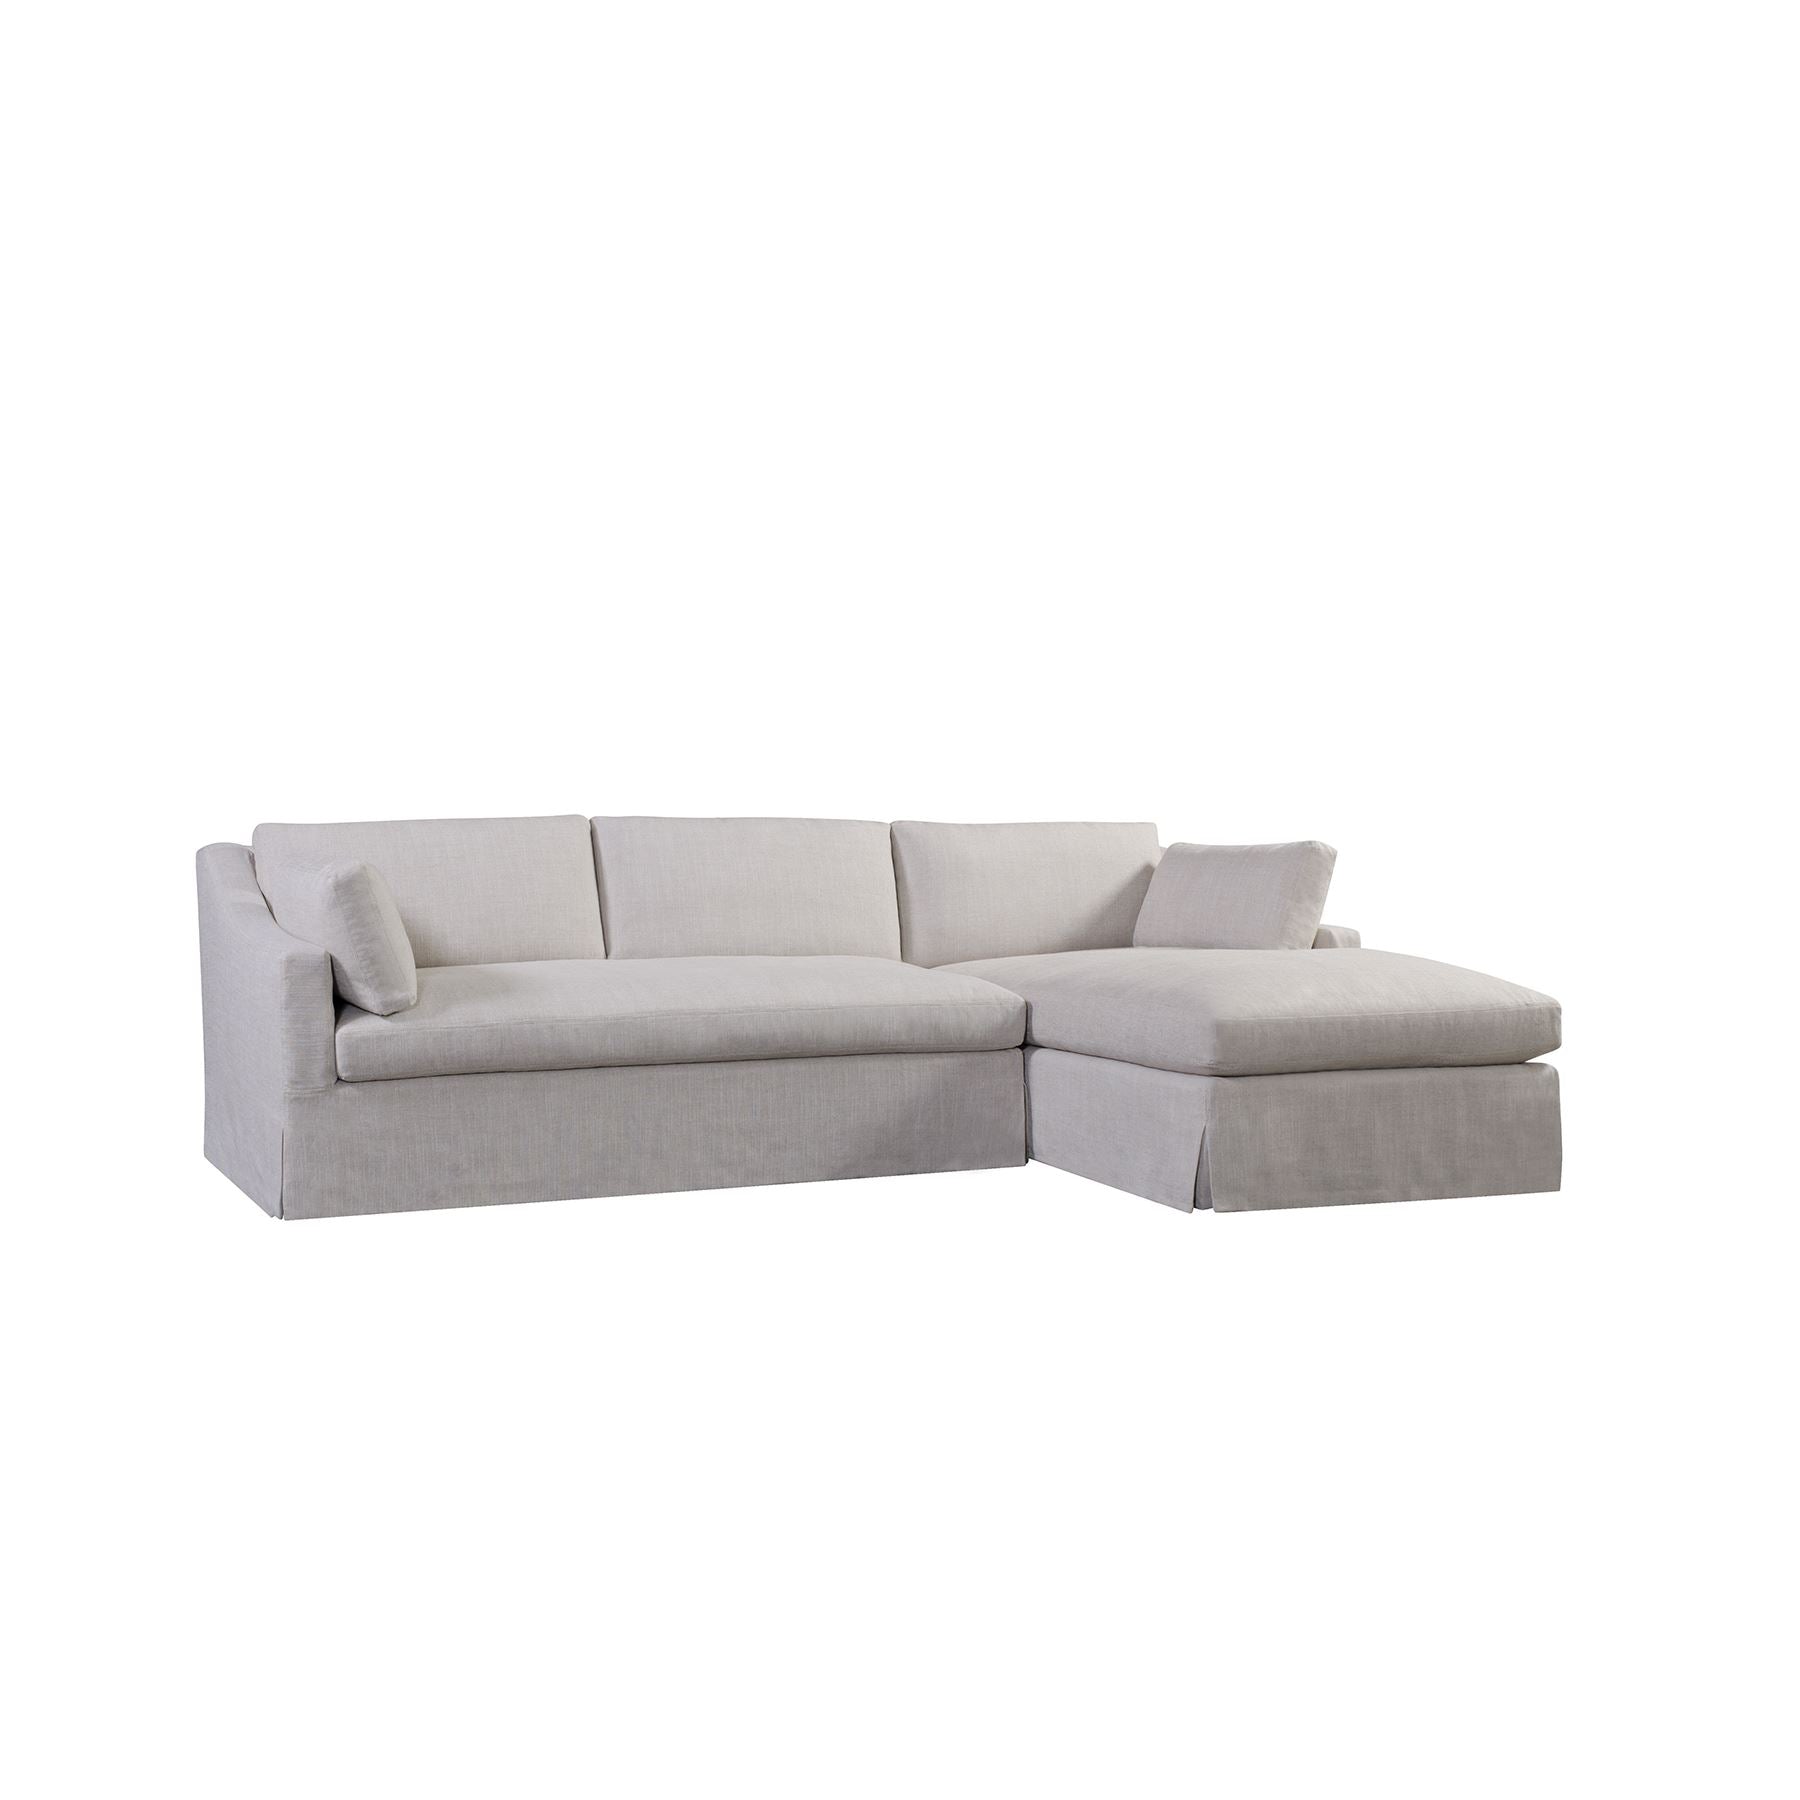 Franklin Slipcovered Sectional Sofa with Right Chaise by Huck & Peck SOFA Huck and Peck